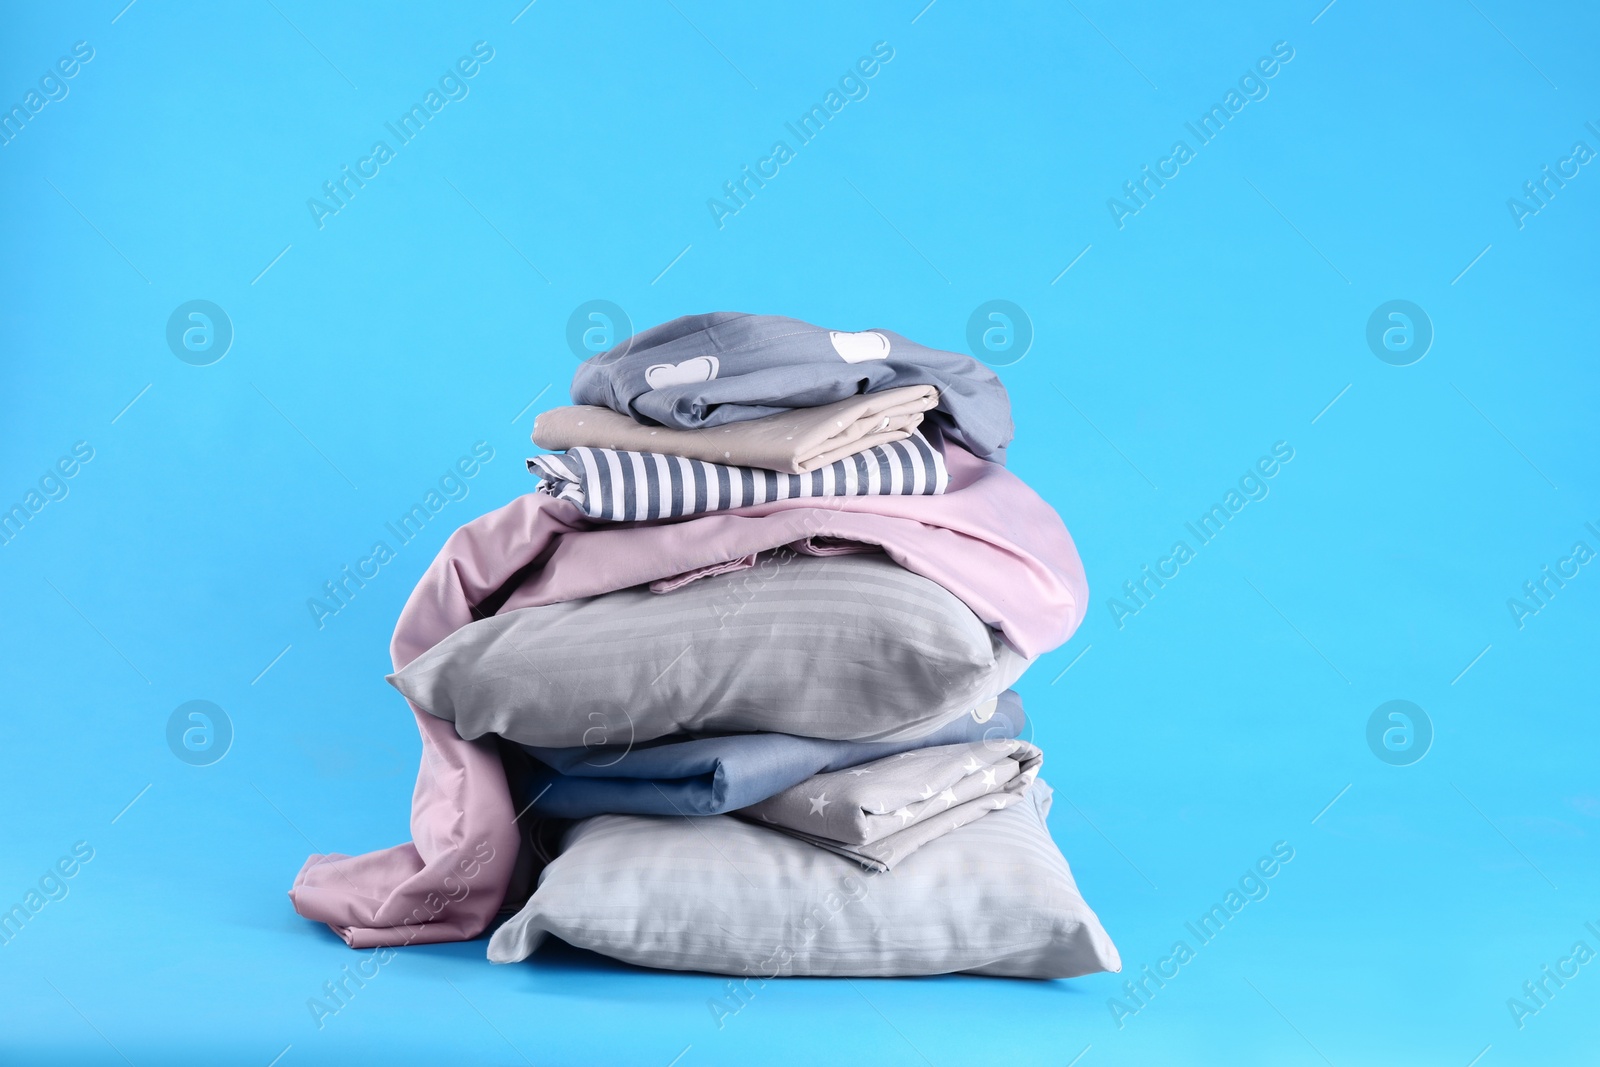 Photo of Stack of clean bed sheets and pillows on blue background